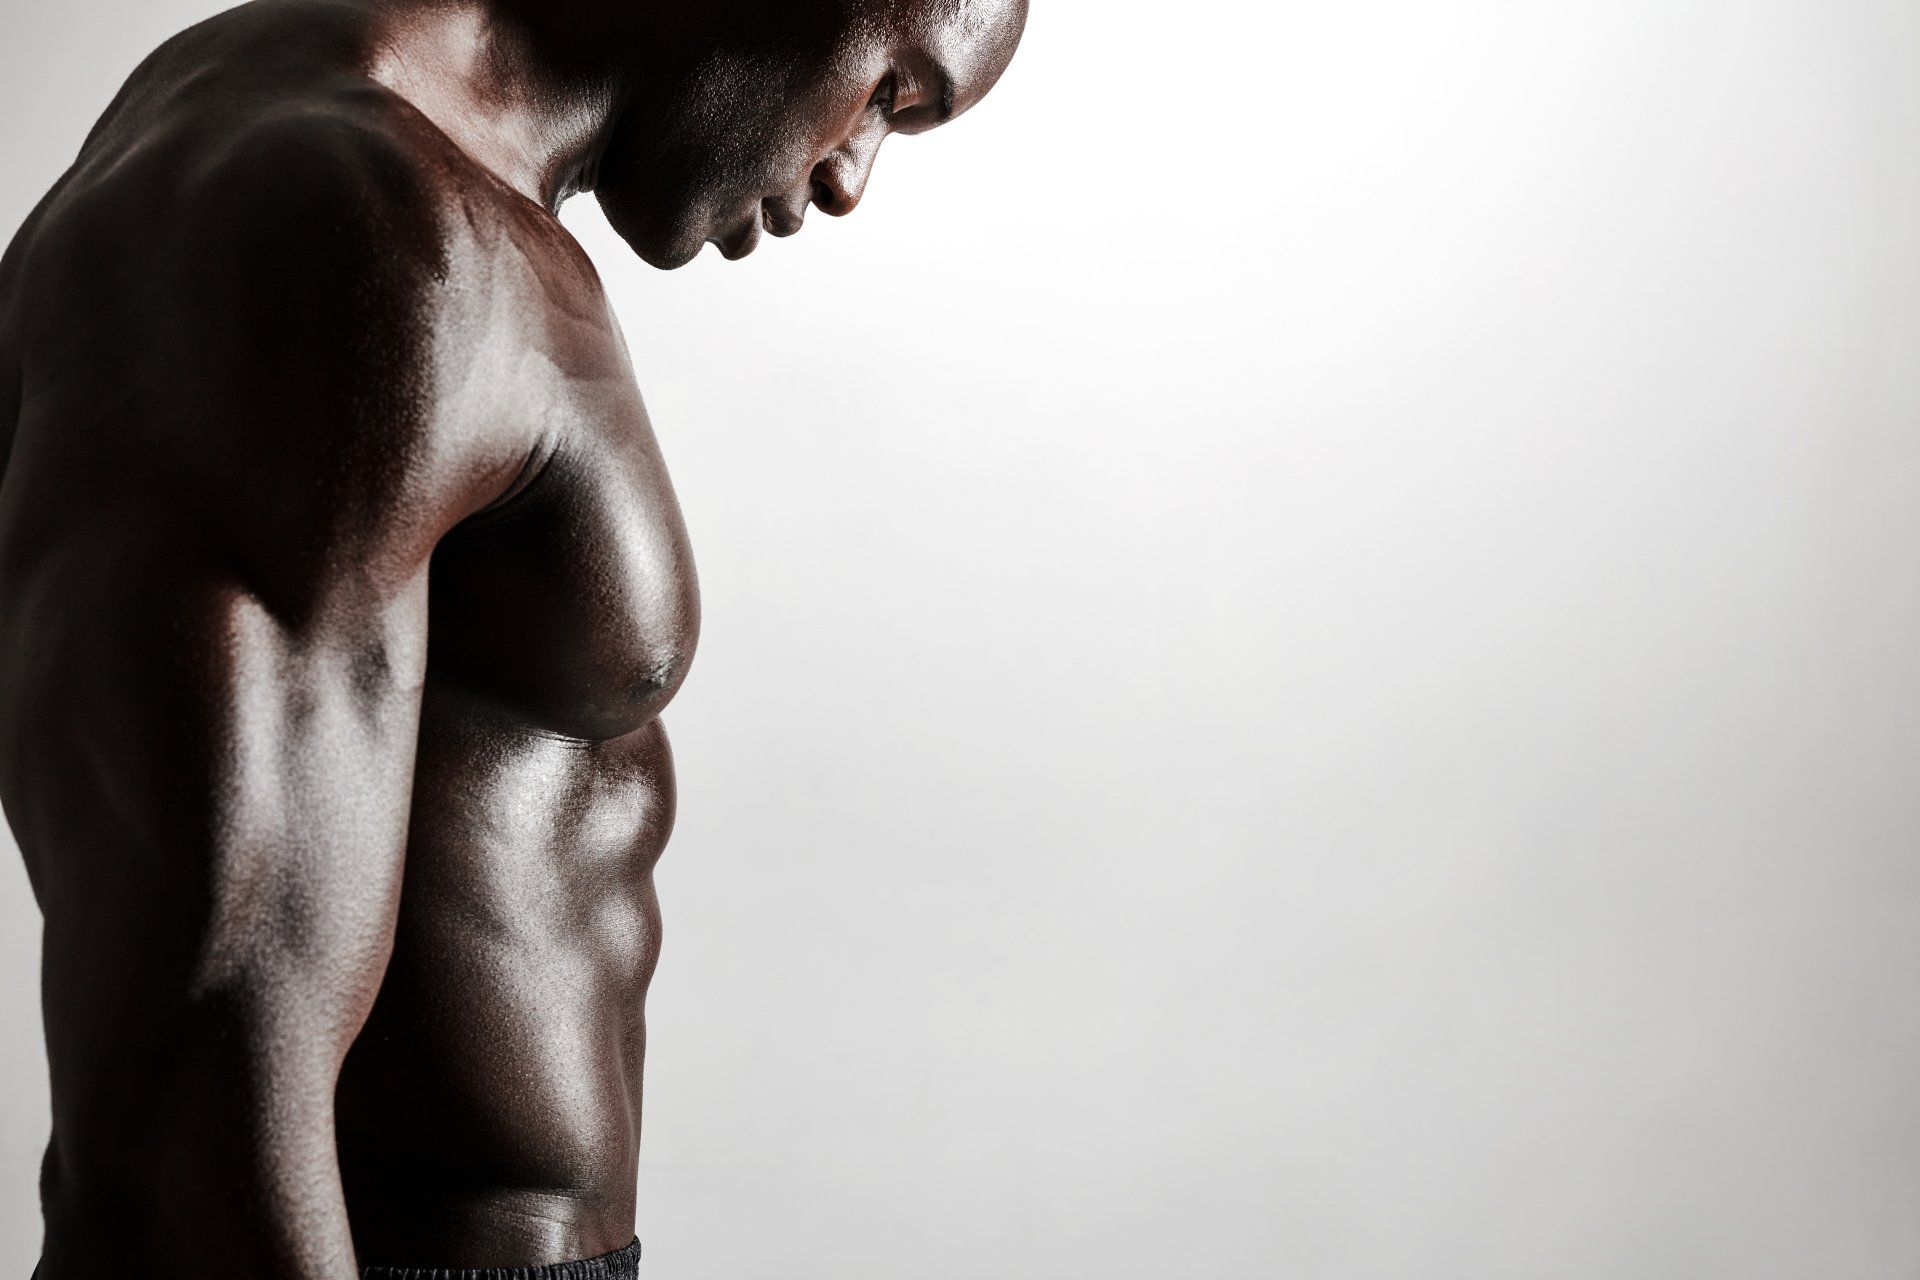 Shirtless Muscular African American Male - CoolSculpting®